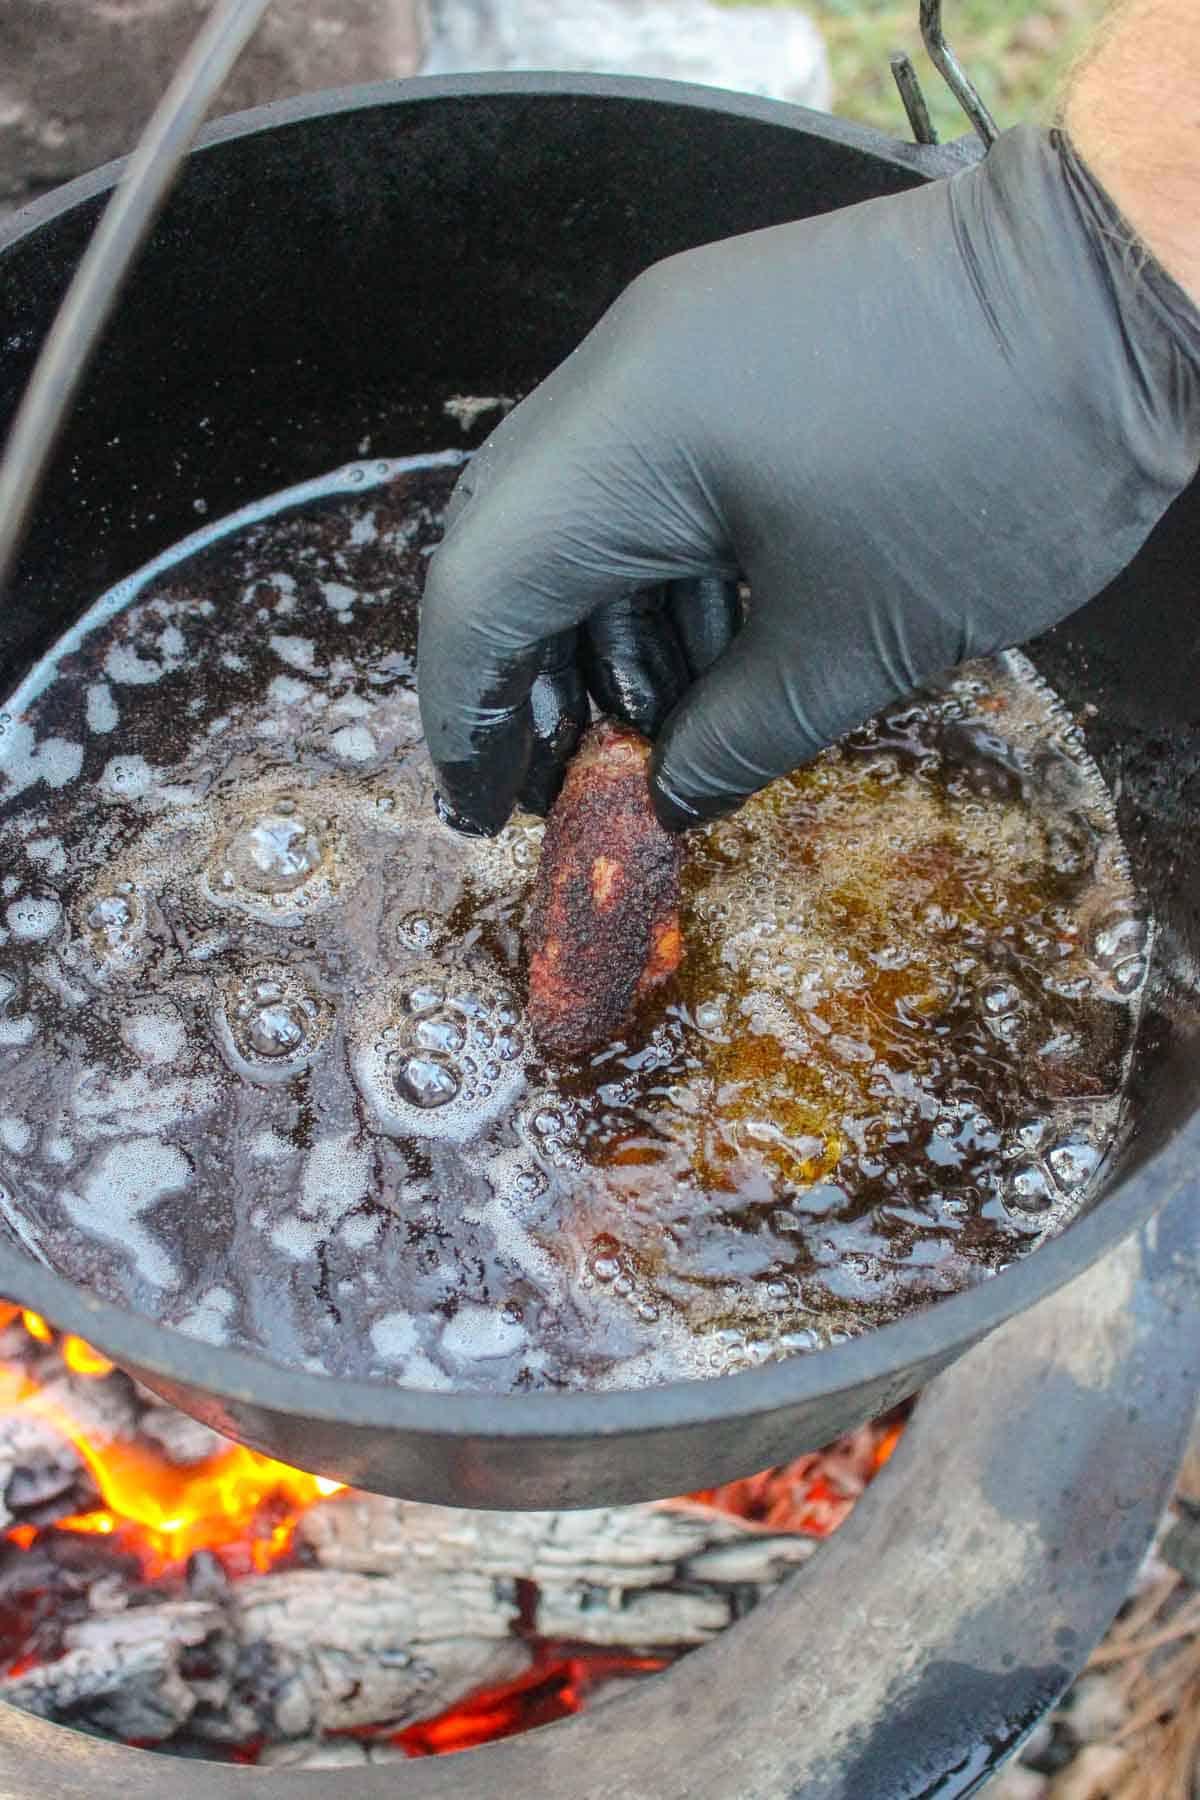 Adding a chicken wing to the frying oil.